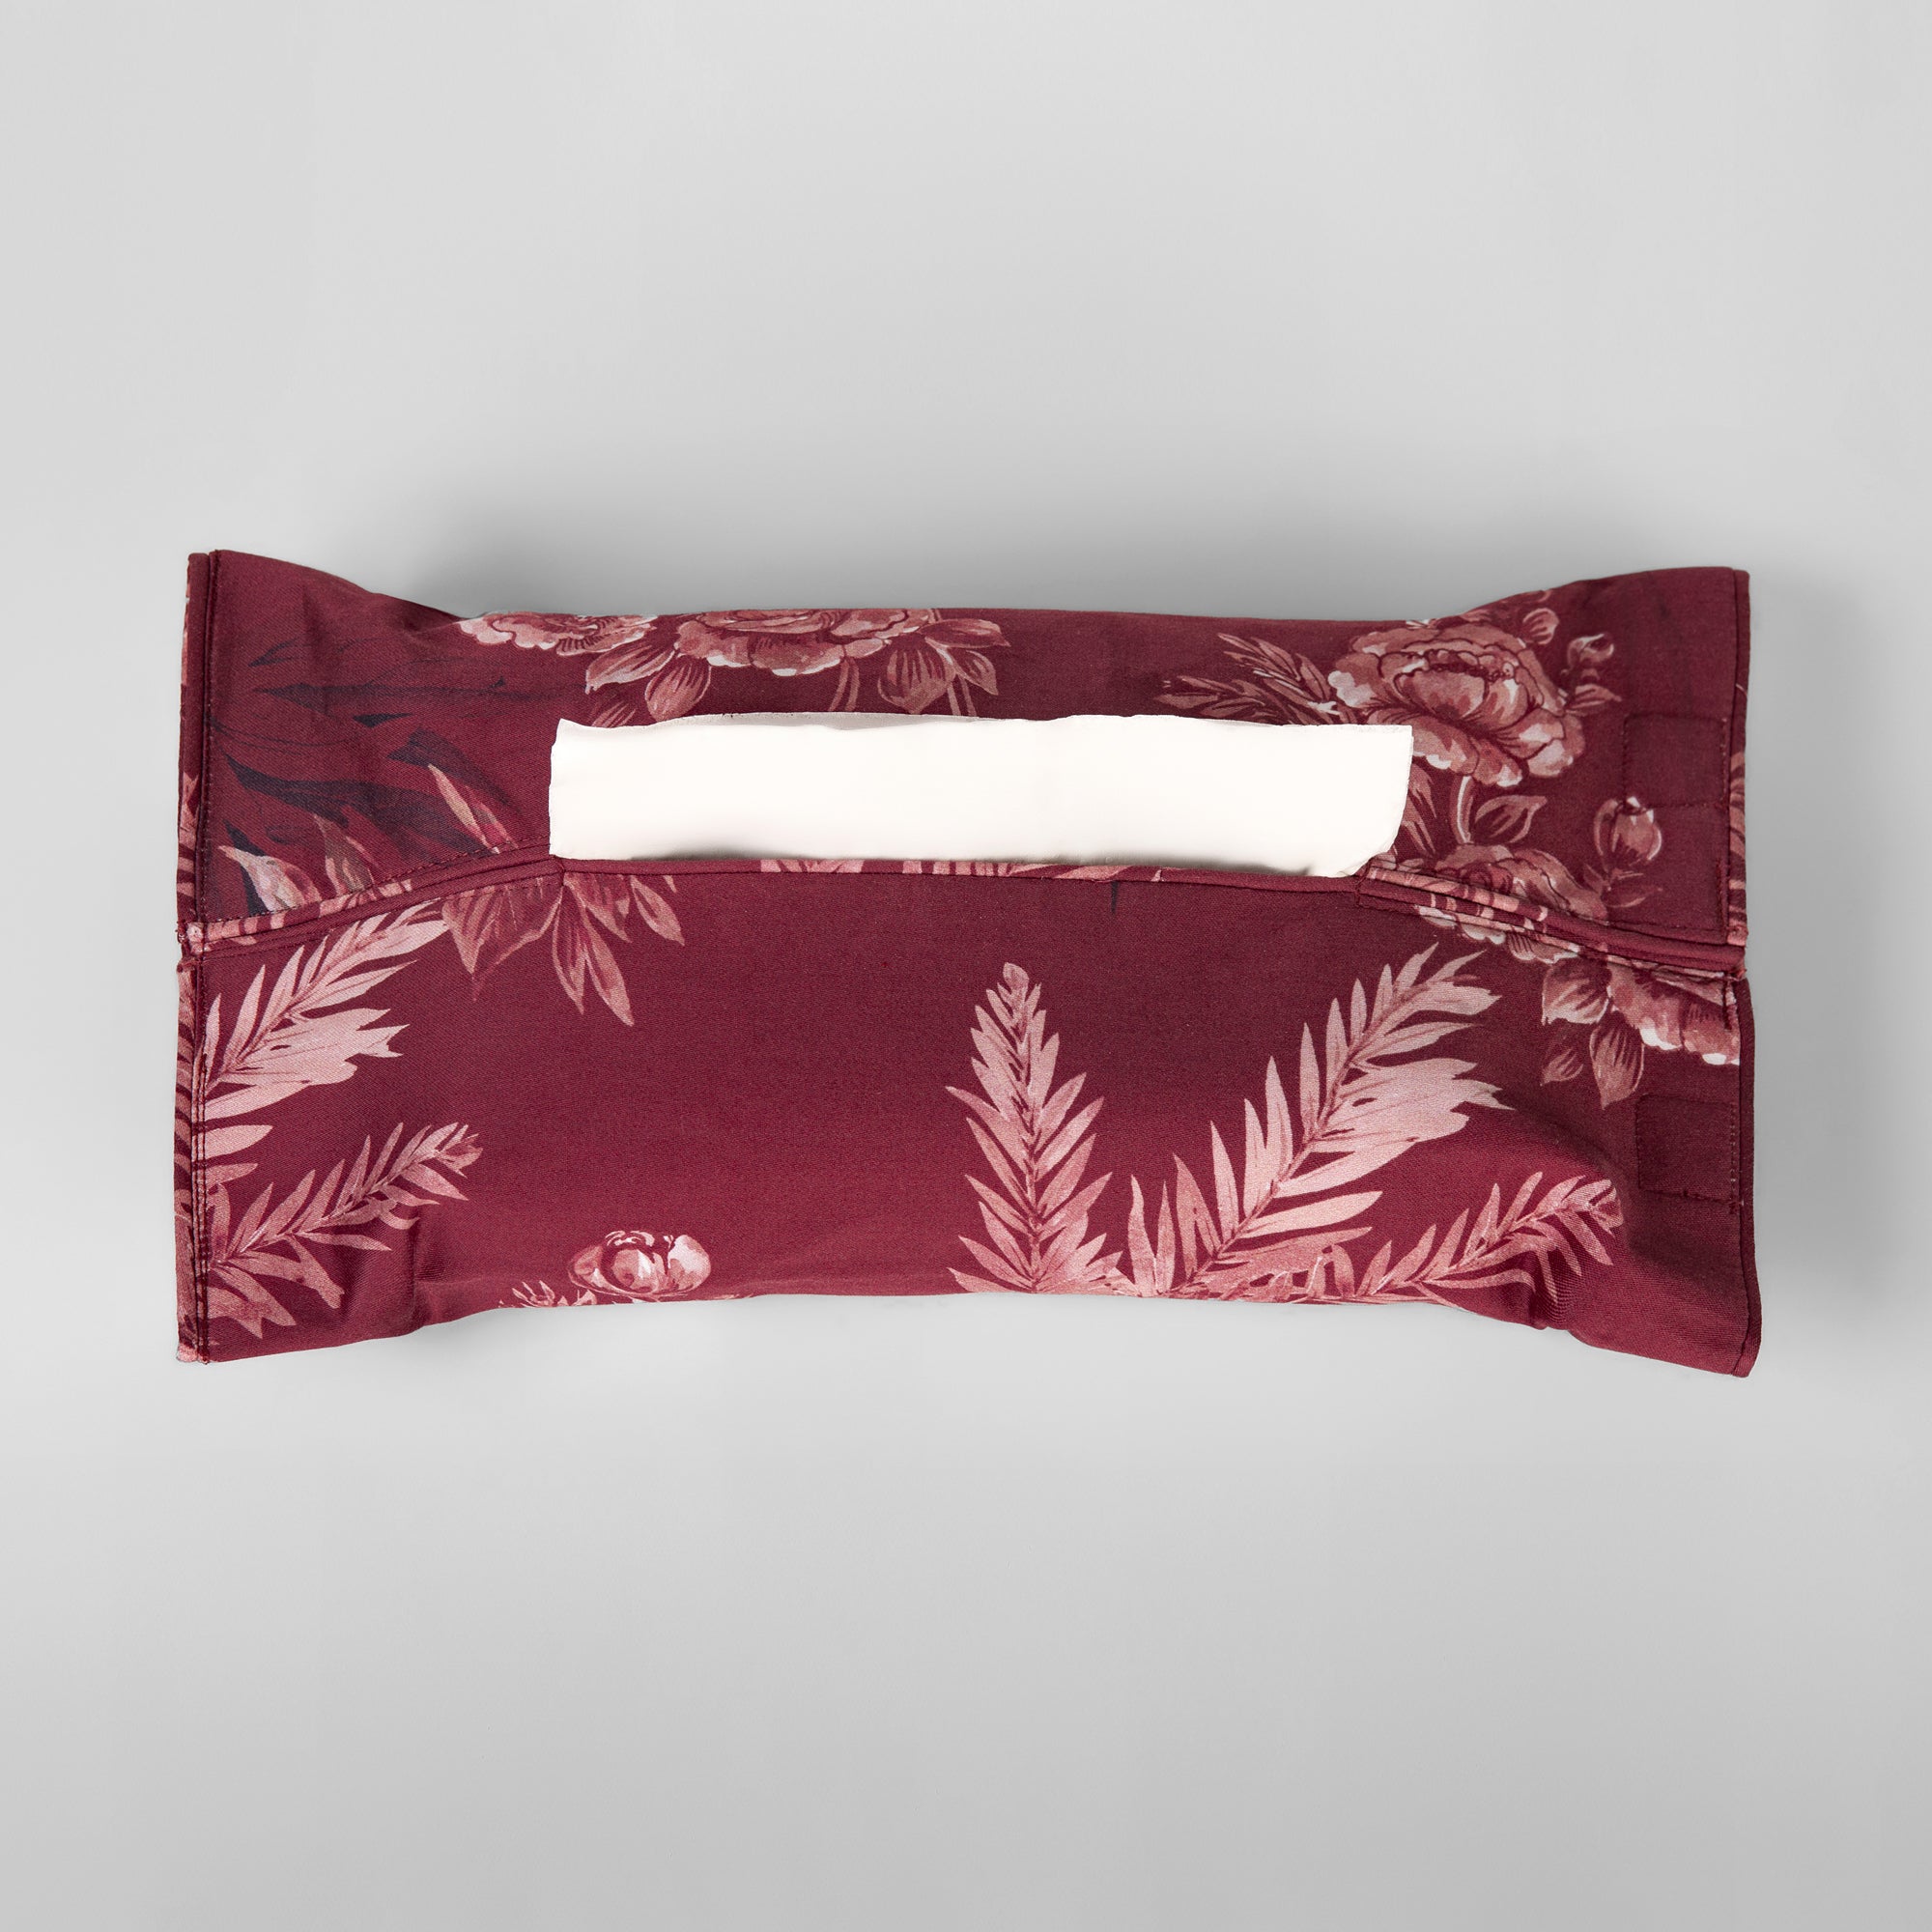 The Linen Company Accessories Standard Mulberry Medley Tissue Box Cover